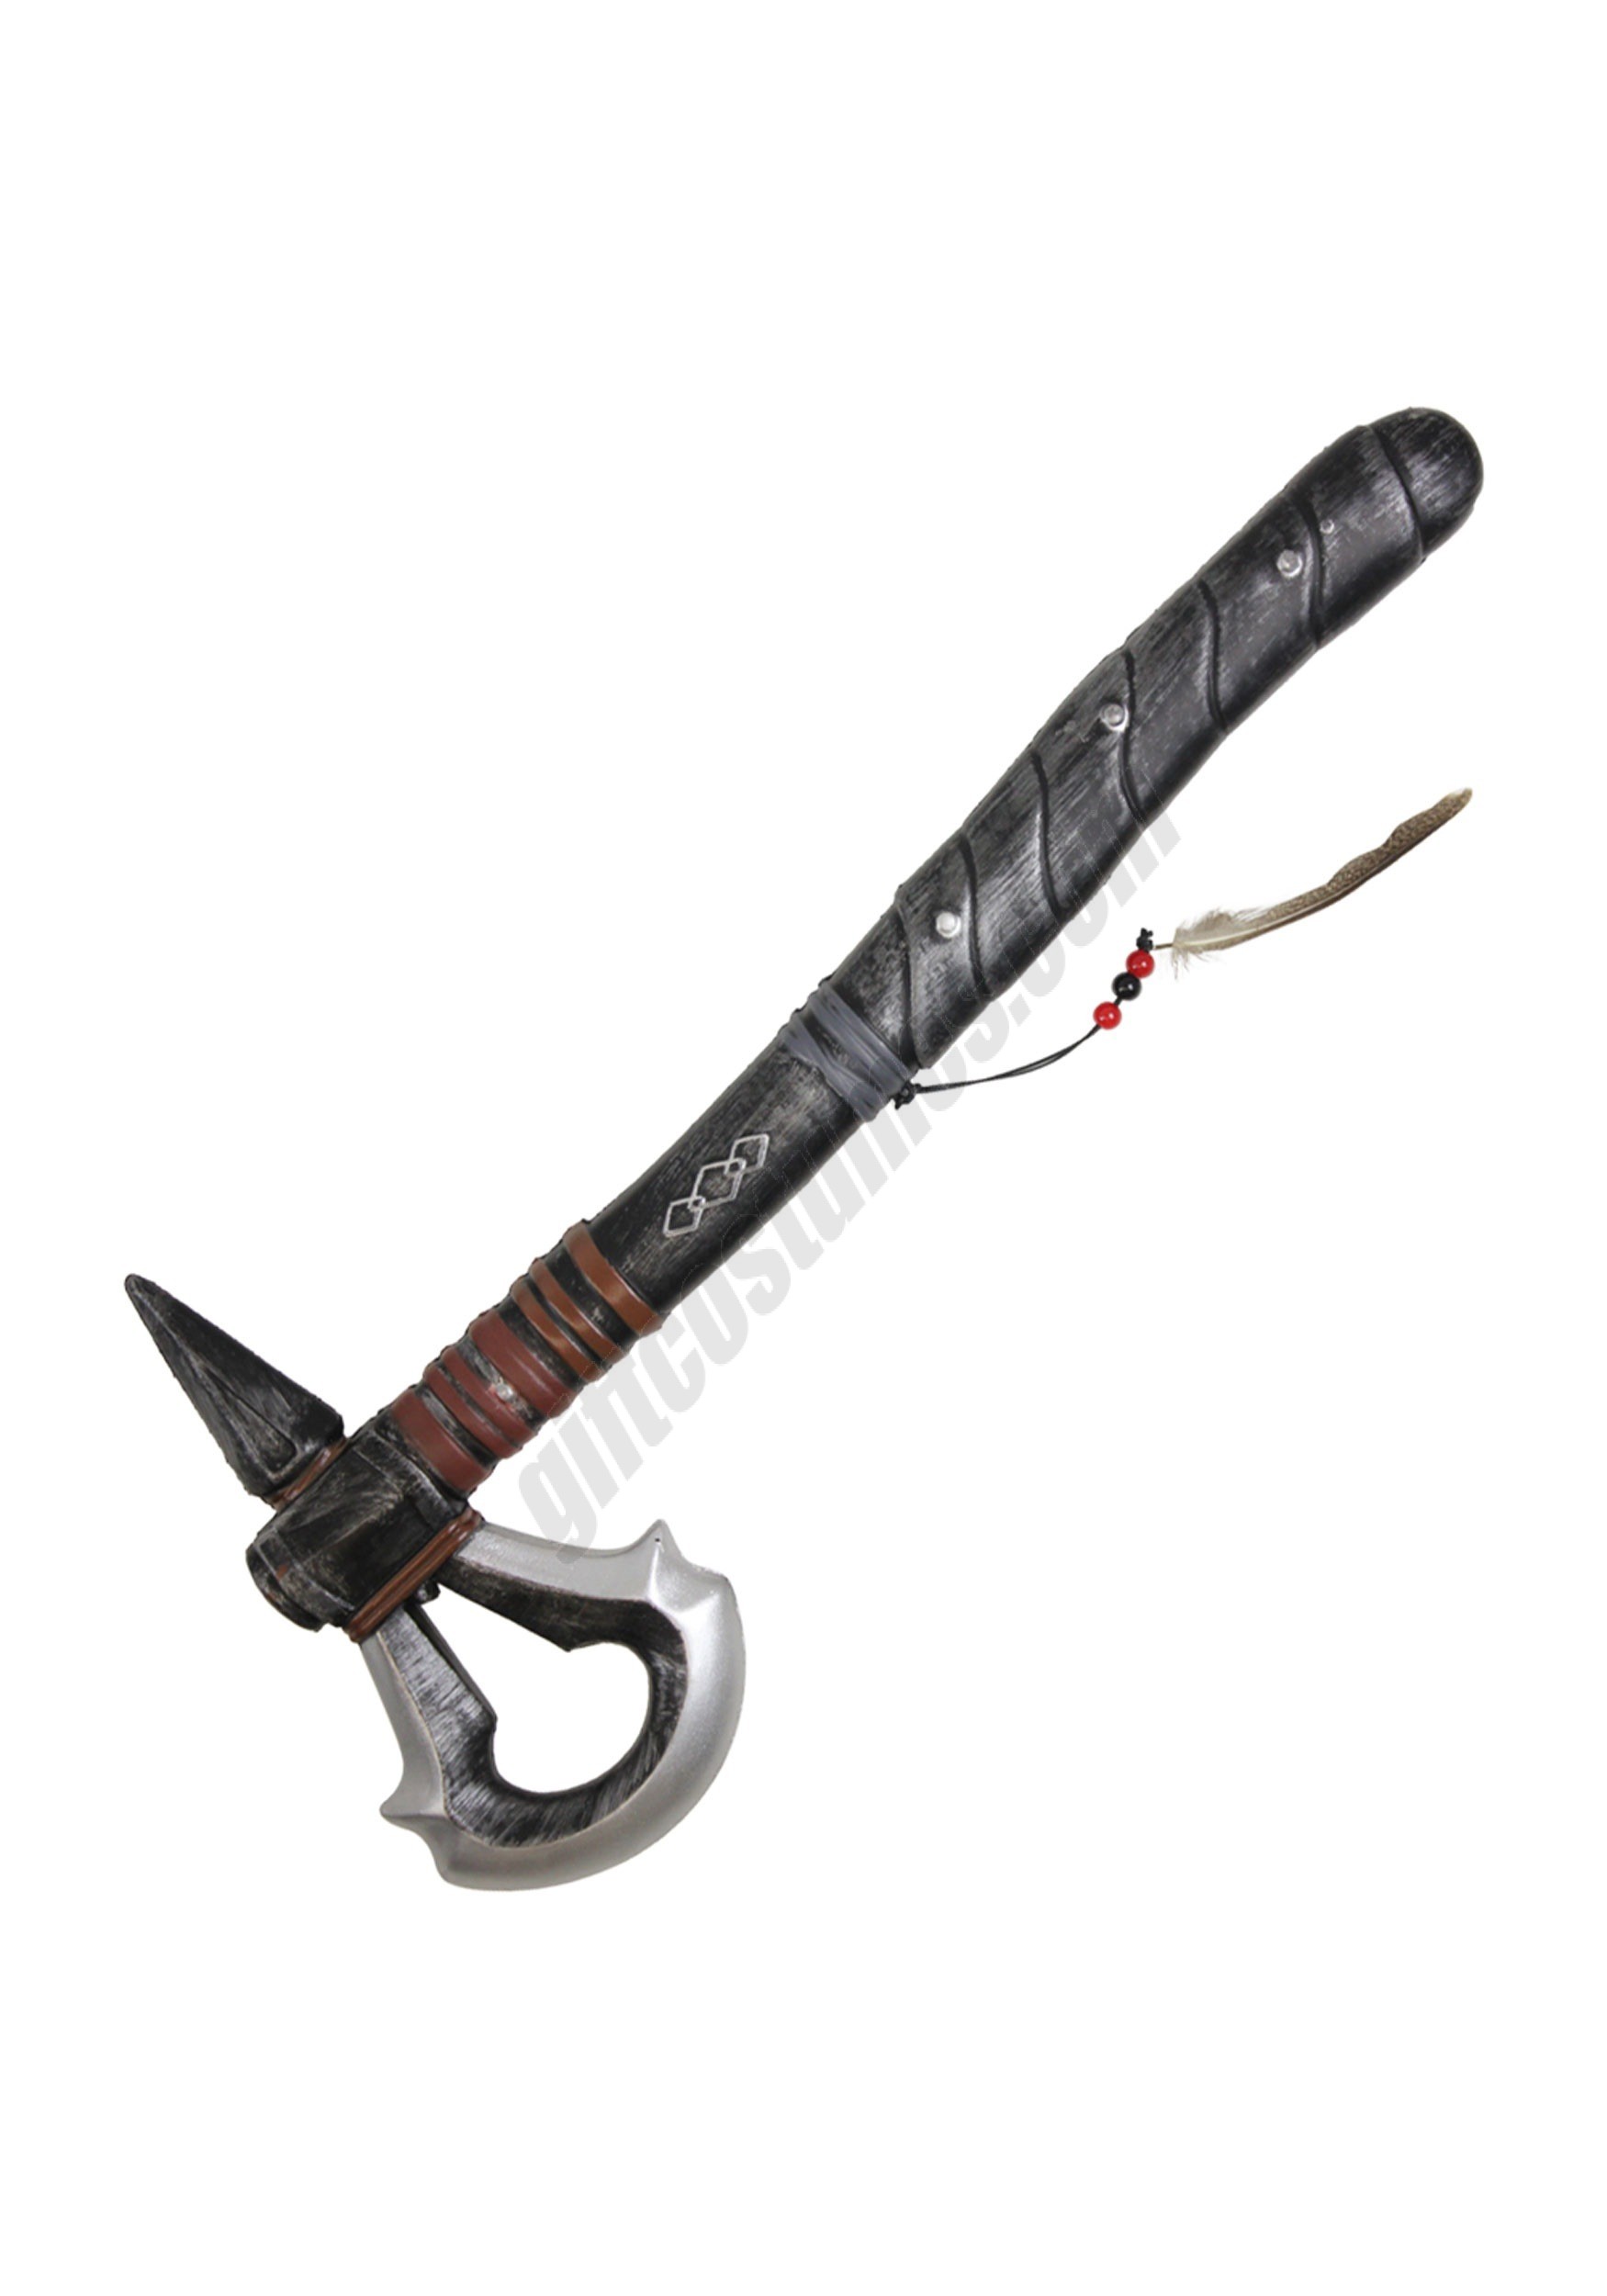 Assassin's Creed Connor's Tomahawk Foam Axe Promotions - Assassin's Creed Connor's Tomahawk Foam Axe Promotions